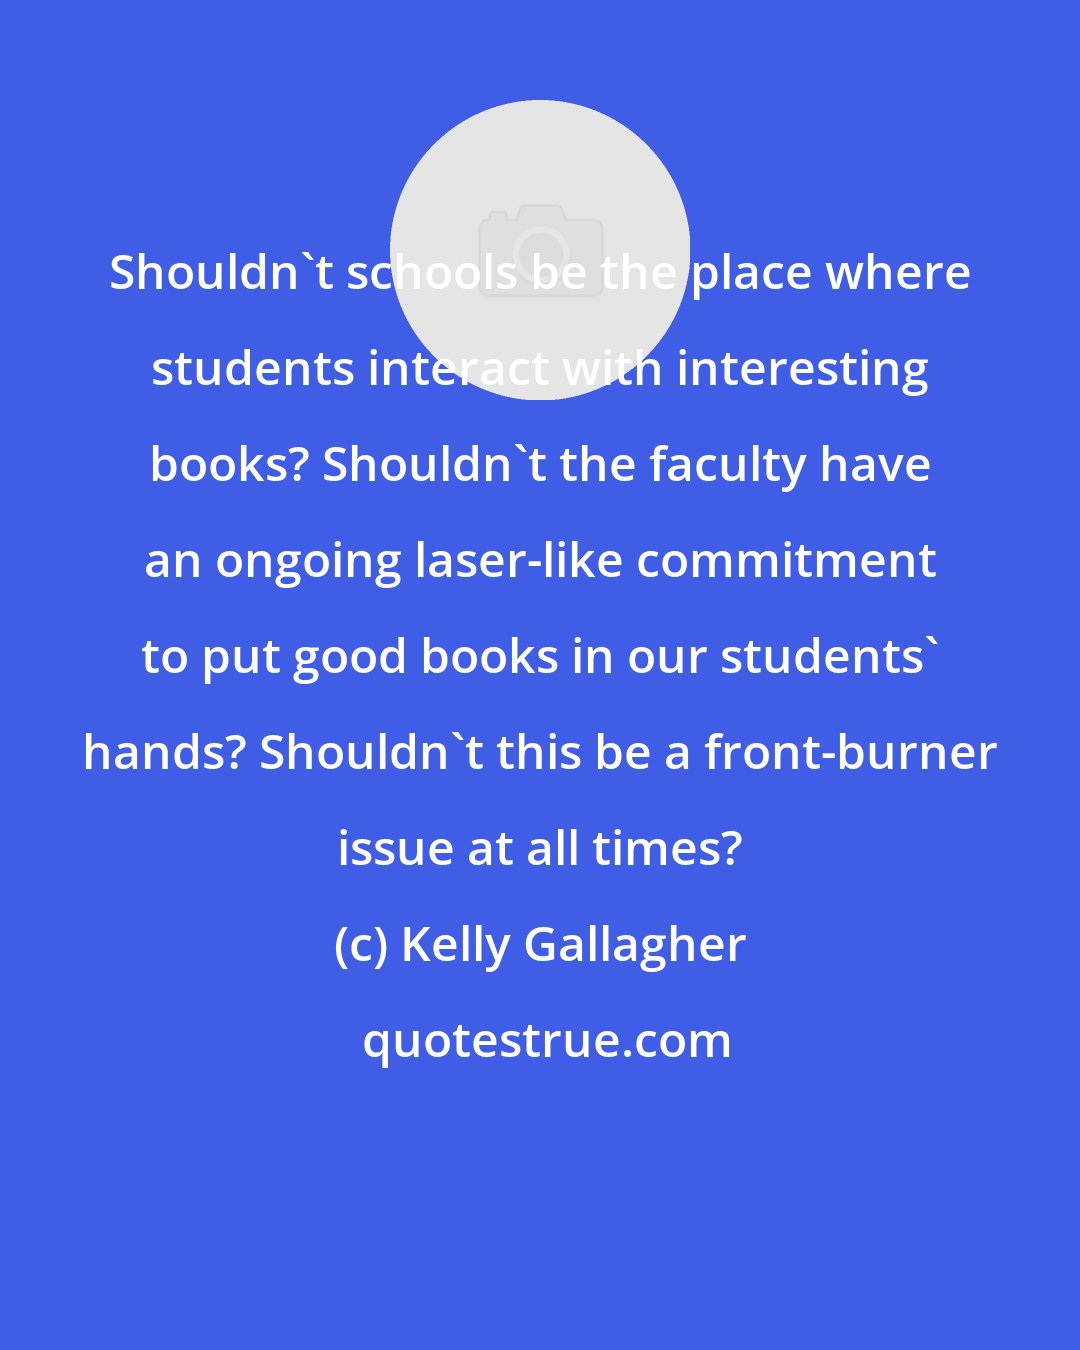 Kelly Gallagher: Shouldn't schools be the place where students interact with interesting books? Shouldn't the faculty have an ongoing laser-like commitment to put good books in our students' hands? Shouldn't this be a front-burner issue at all times?